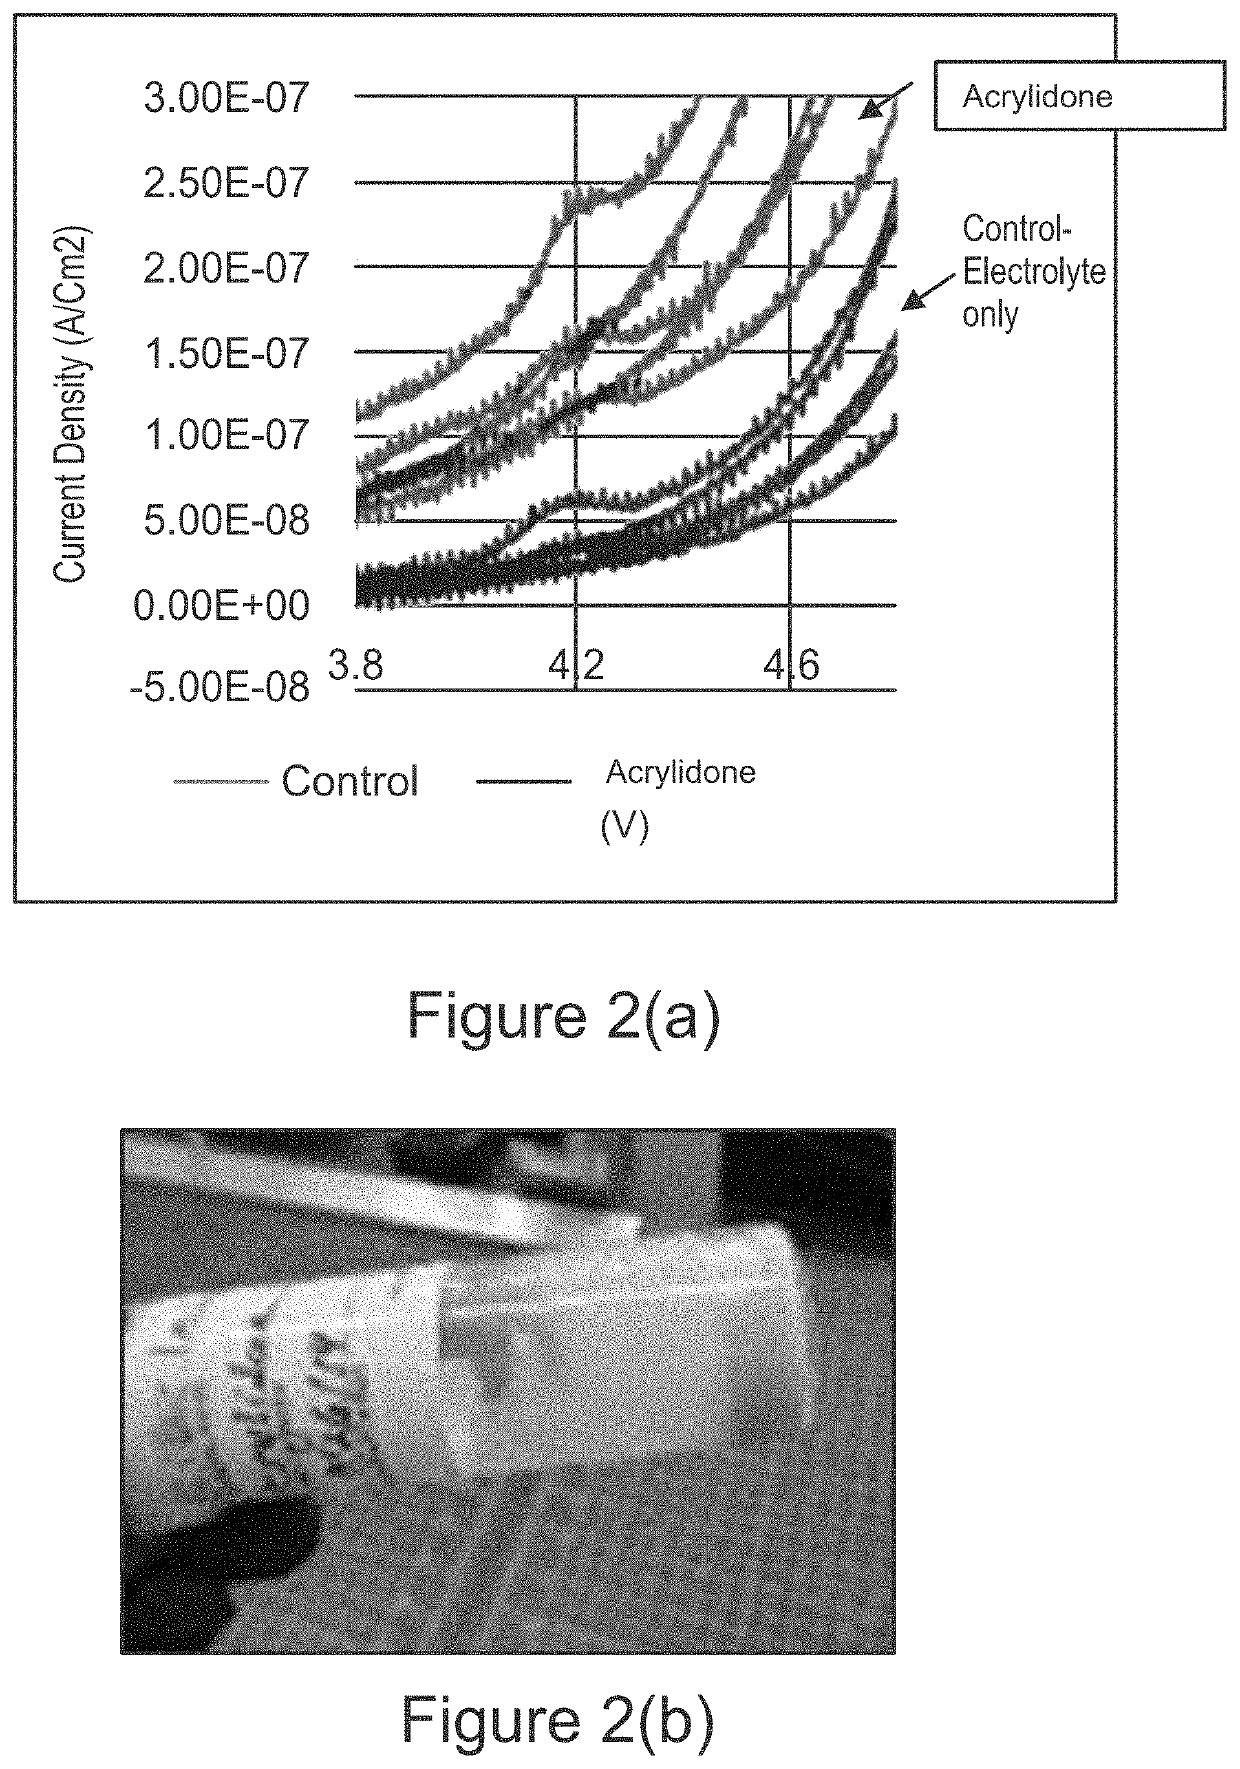 Polylactam coated separator membranes for lithium ion secondary batteries and related coating formulations